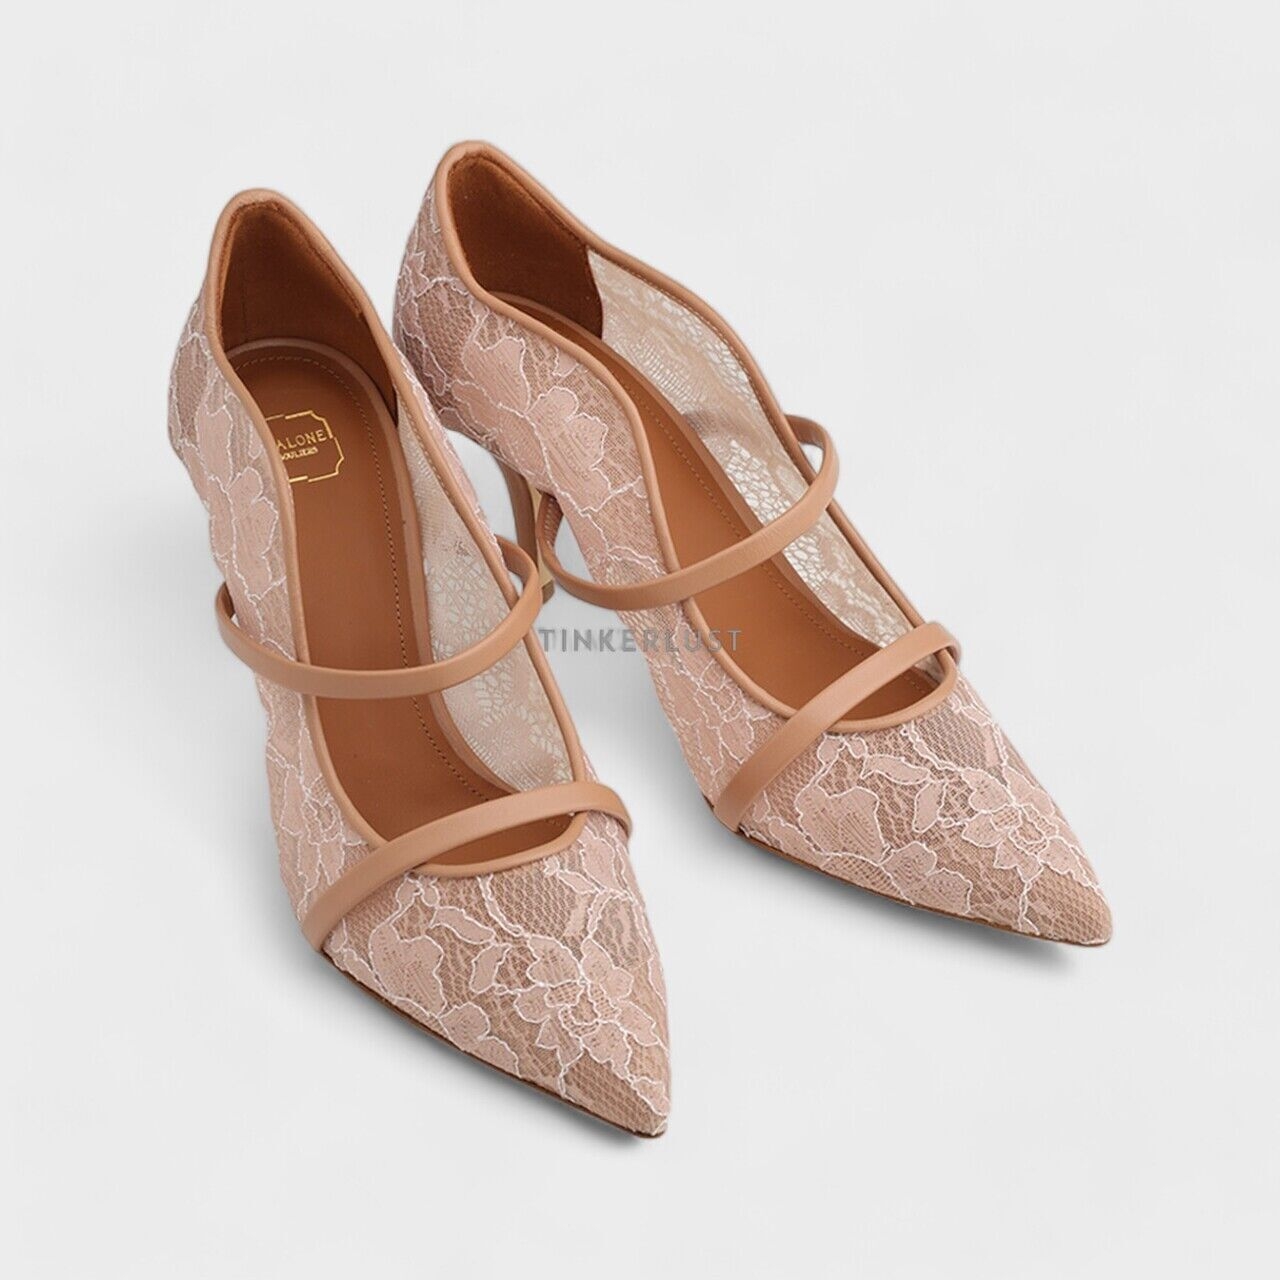 Malone Souliers Maureen Lace Heeled Pumps 70mm in Mauve/Nude Heels